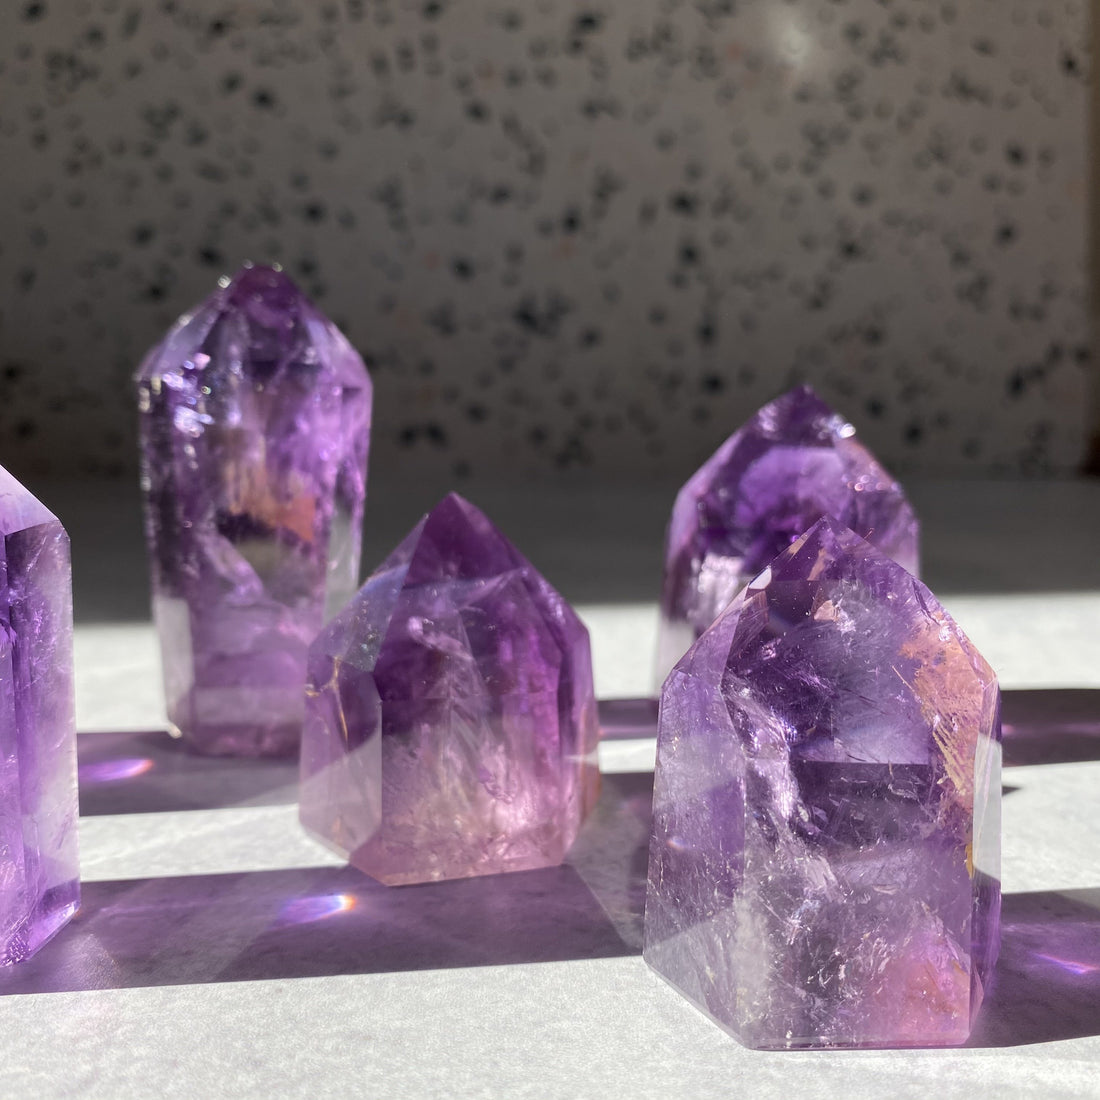 10 Best Healing Crystals For Beginners